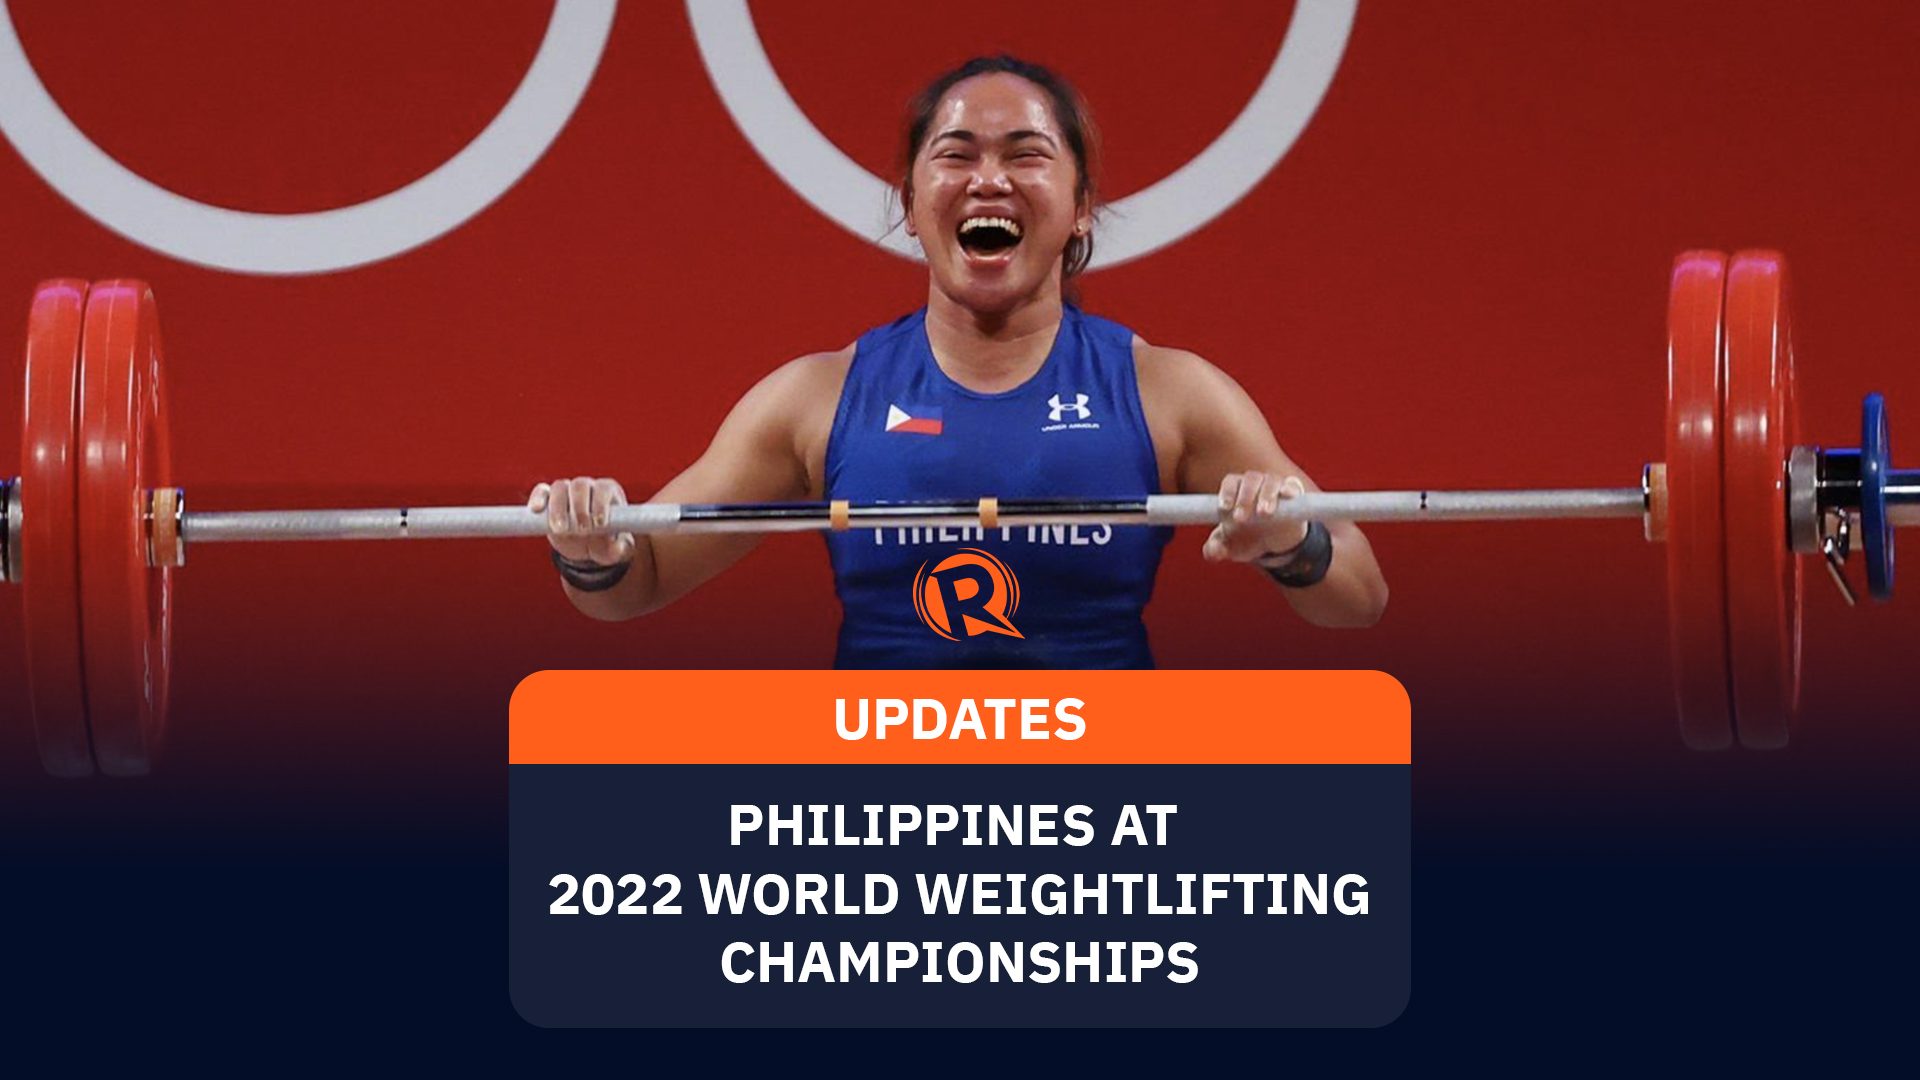 UPDATES: Philippines at the 2022 World Weightlifting Championships